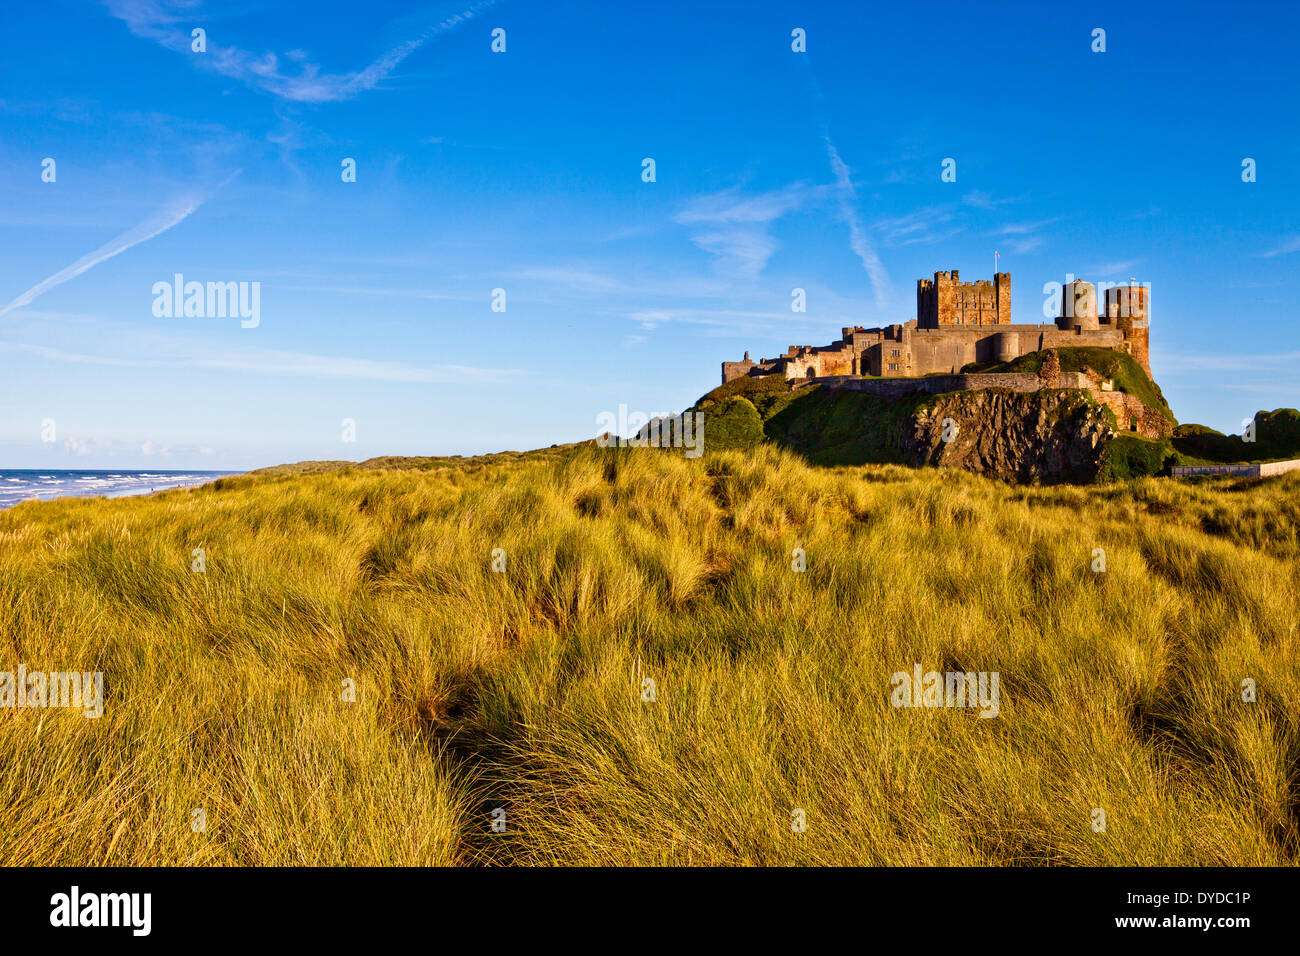 Bamburgh castle rises above the sea and dunes. Stock Photo